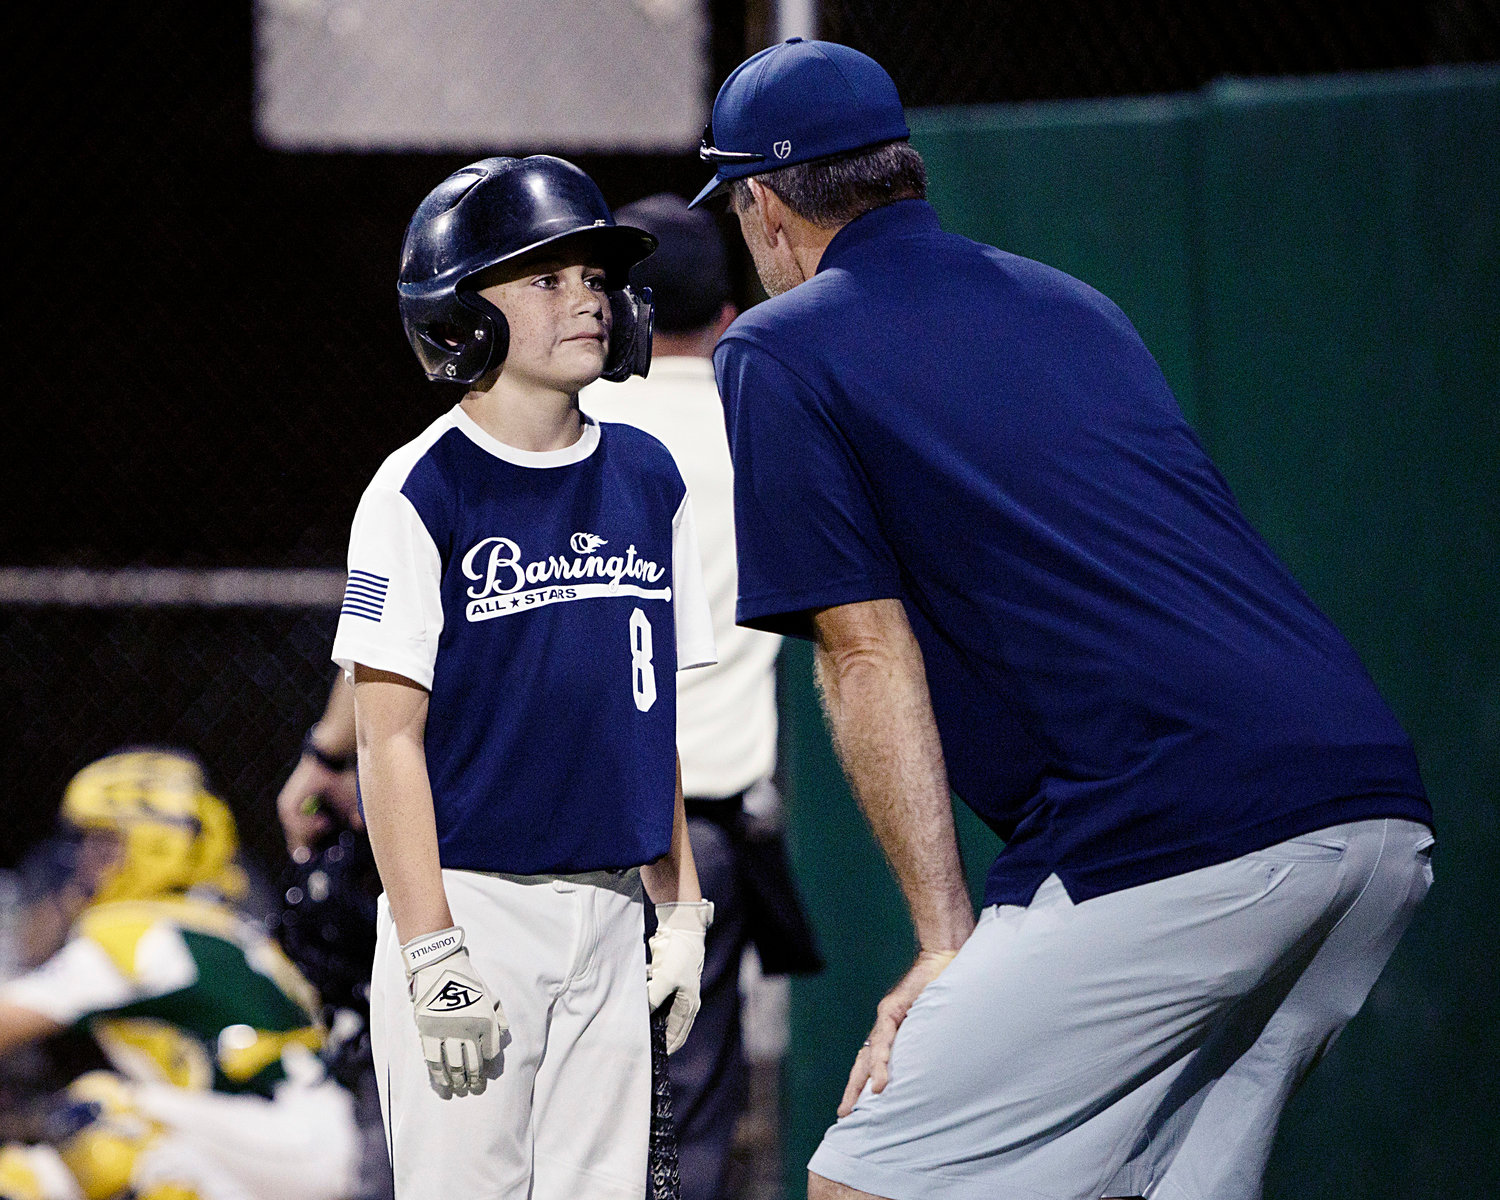 Luke Hanley is offered advice on his way up to bat against Cranston East in the 11U All-Star State Tournament, Wednesday.